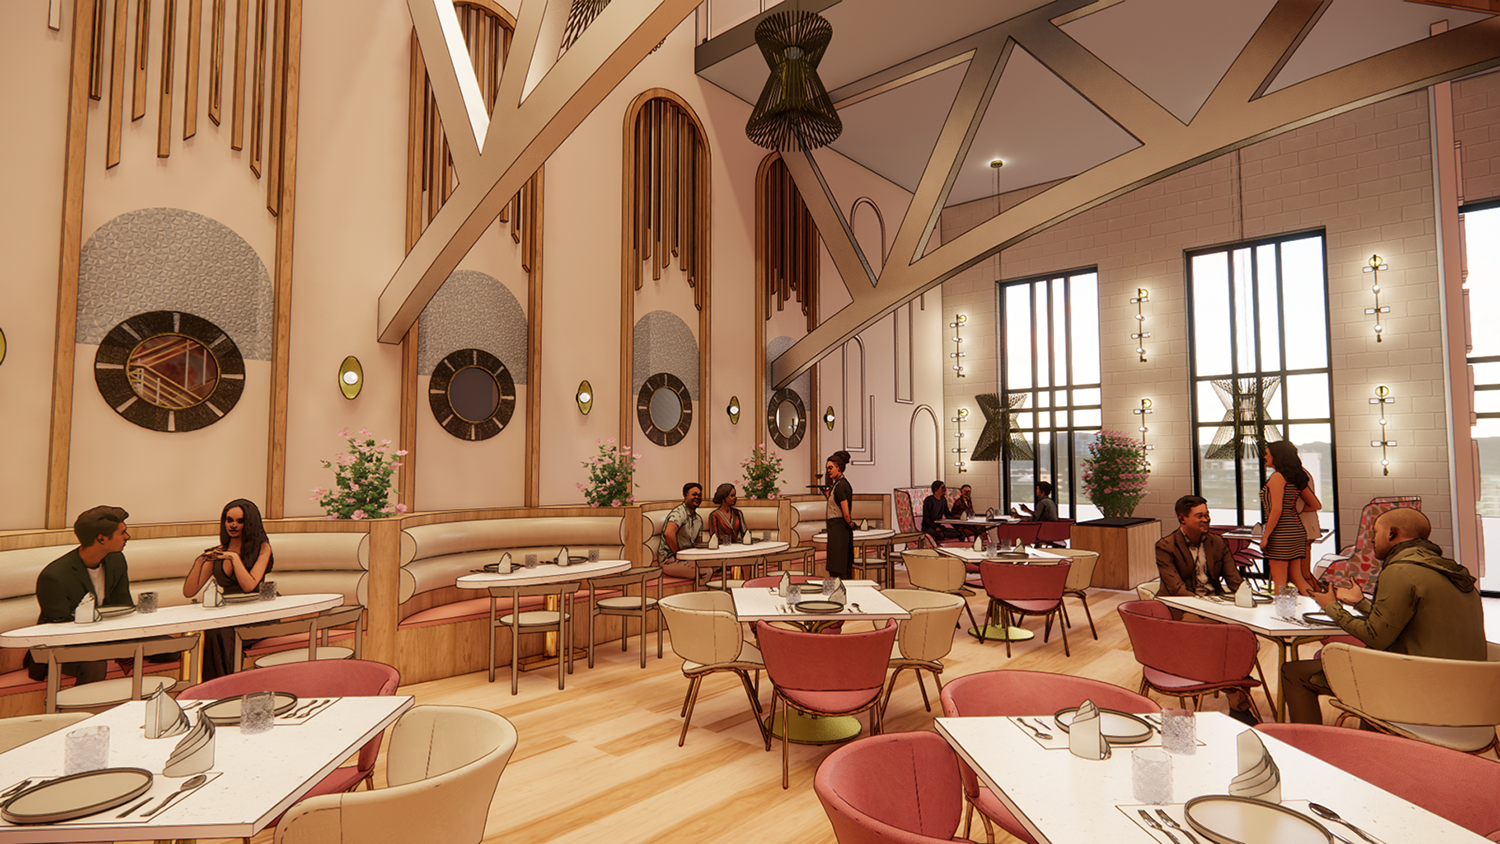 A rendering of a restaurant with high ceilings.